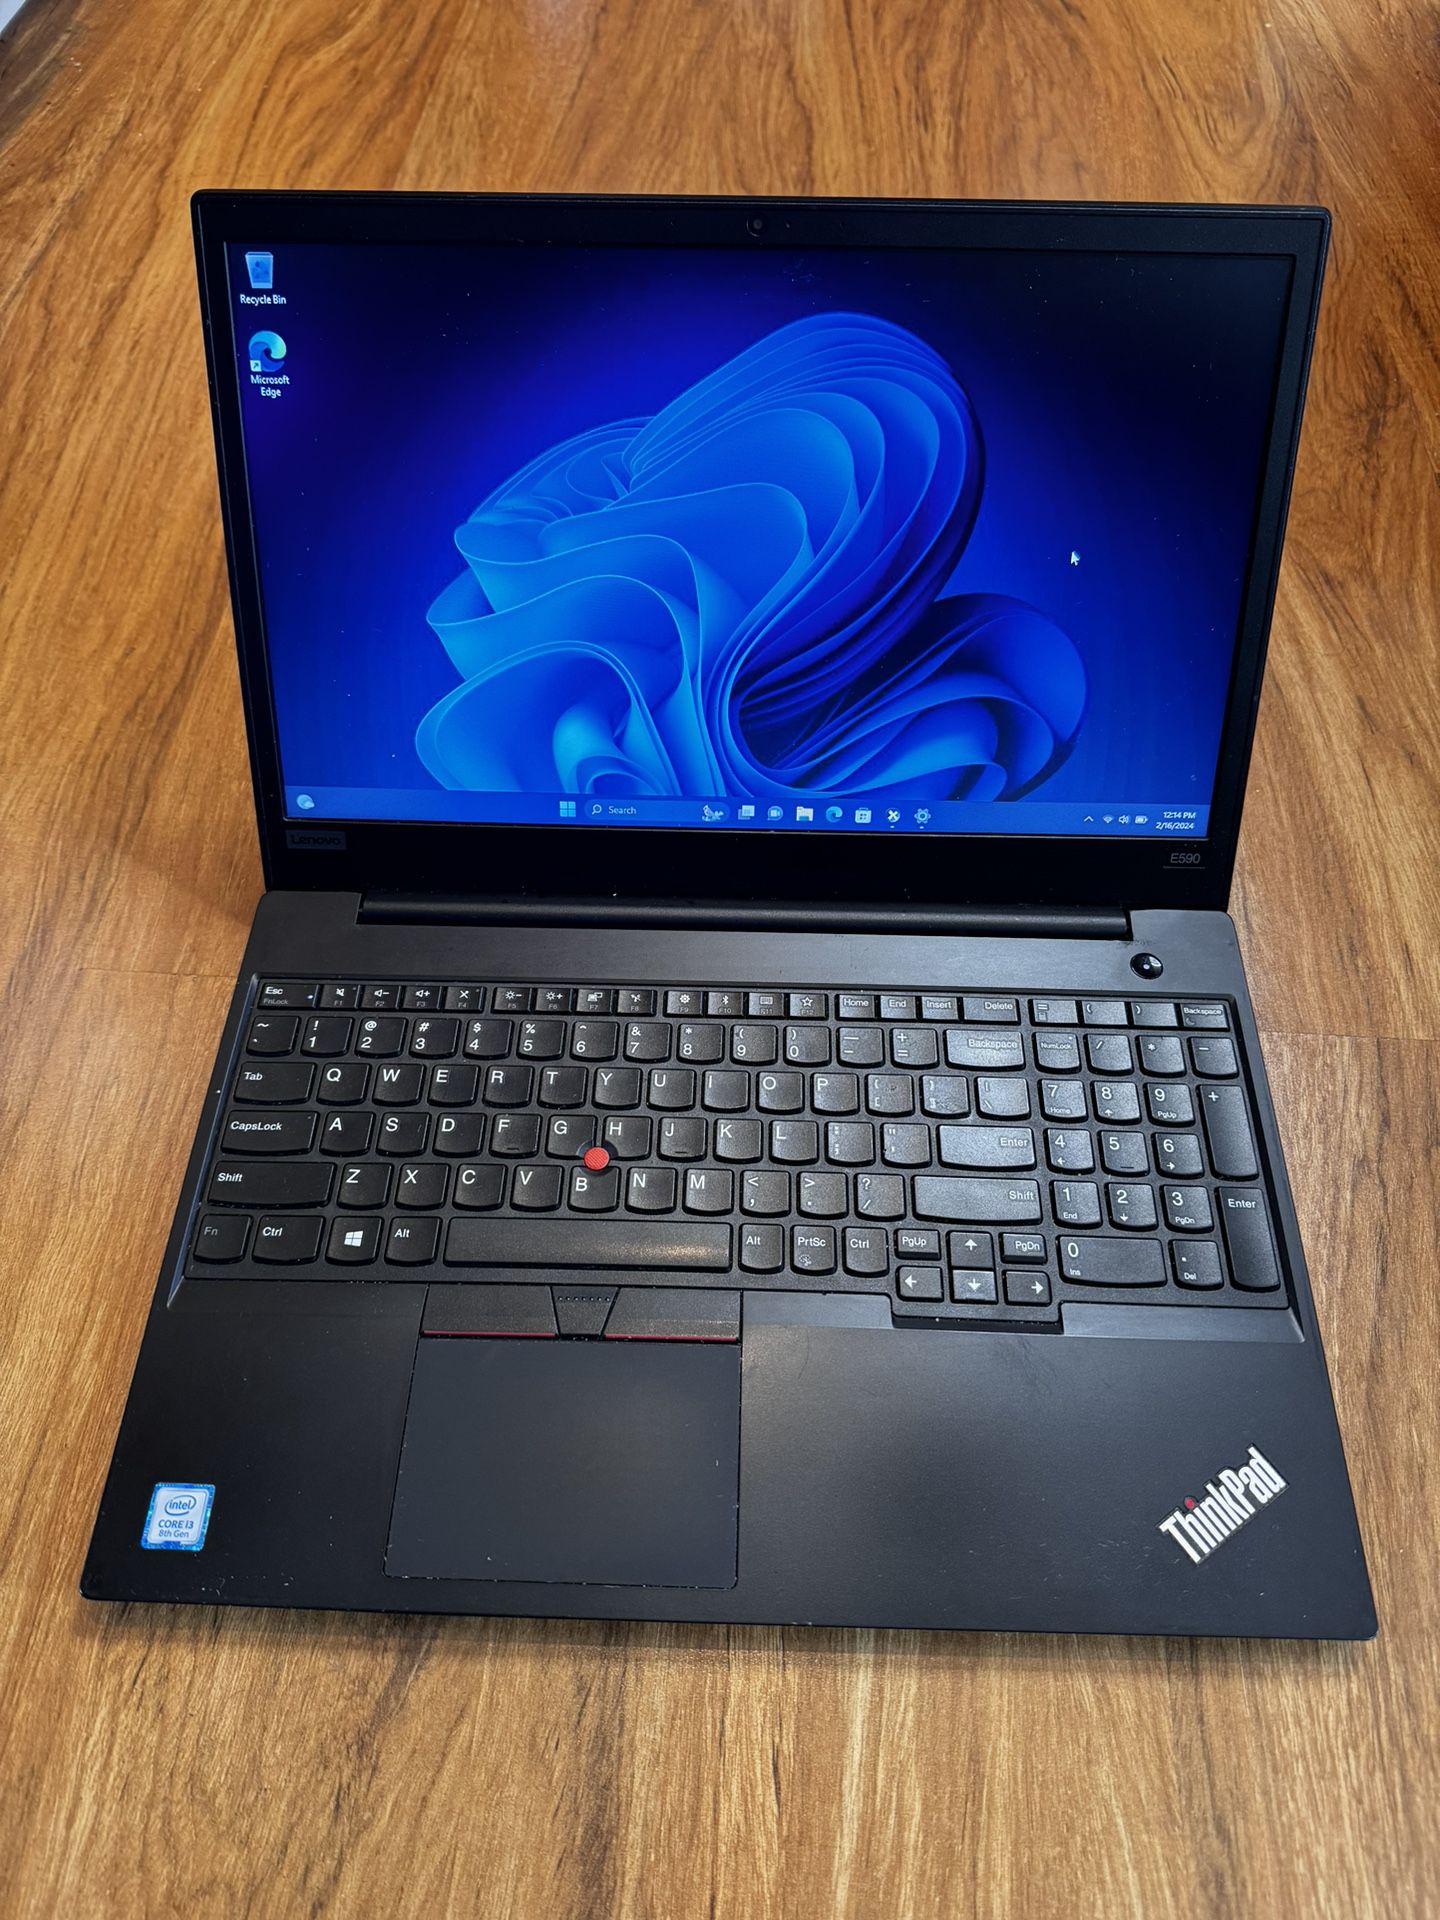 Lenovo ThinkPad E590 core i3 8th gen 8GB Ram 256GB SSD Windows 11 Pro 15.6” FHD Screen Laptop with charger in Excellent Working condition!!!!!  Specif